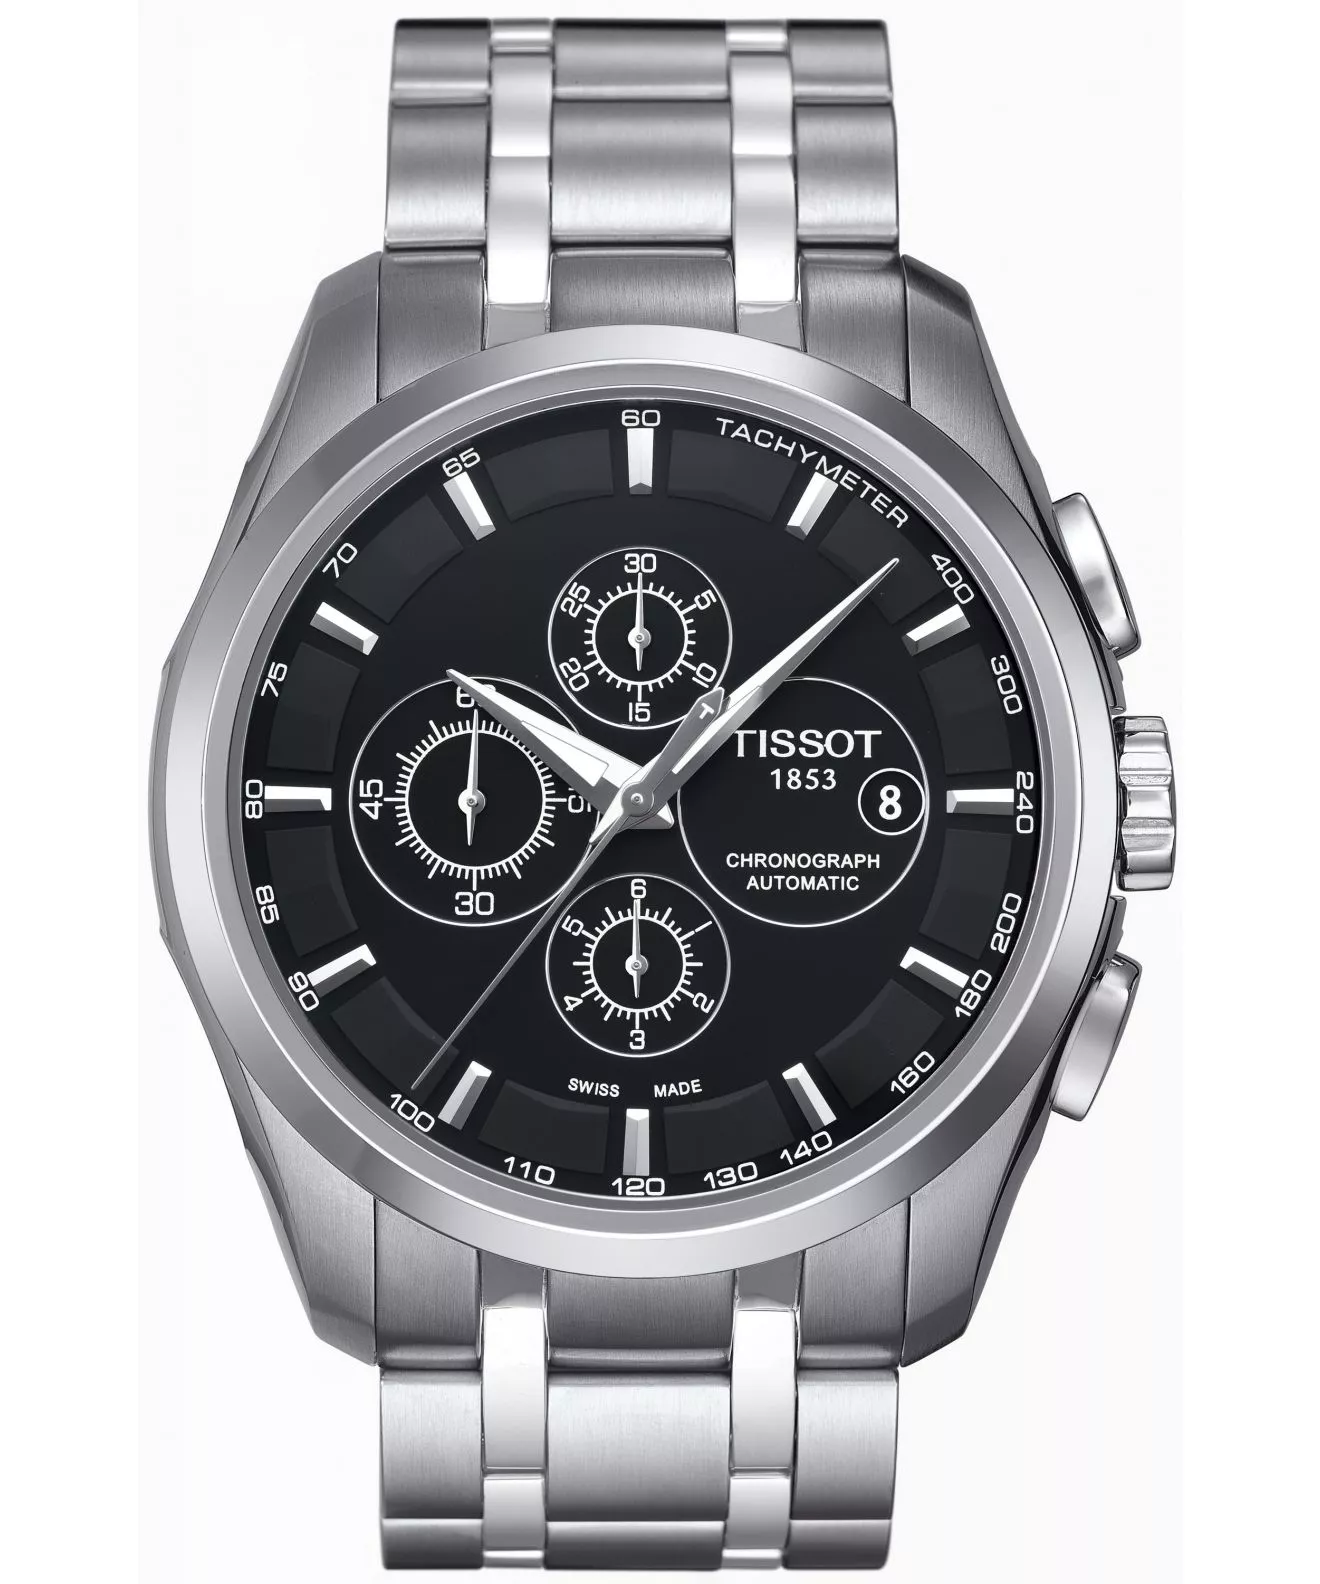 Tissot Couturier Automatic Chronograph gents watch T035.627.11.051.00 (T0356271105100)